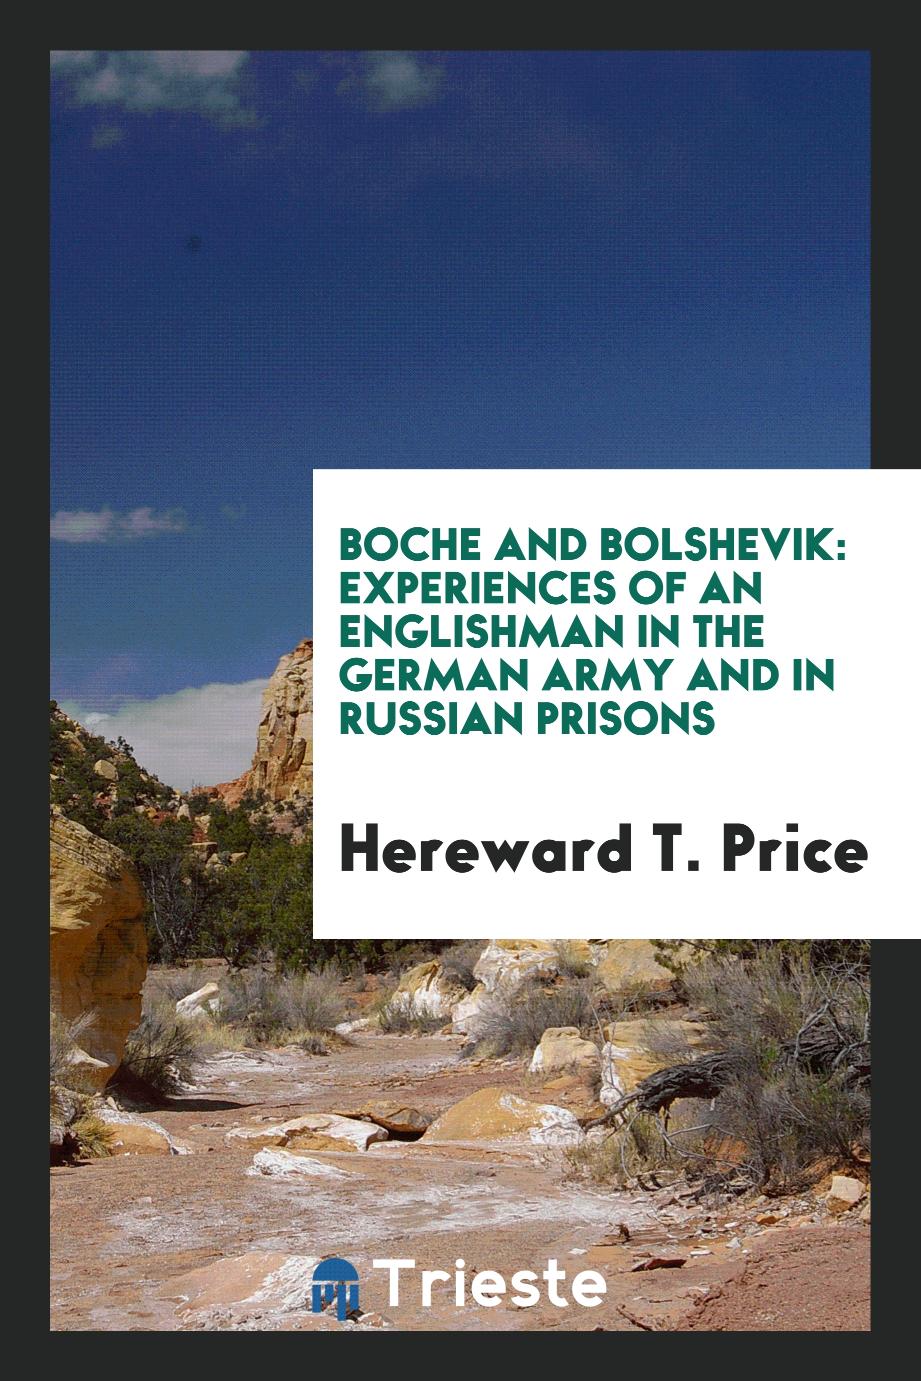 Boche and Bolshevik: experiences of an Englishman in the German army and in Russian prisons